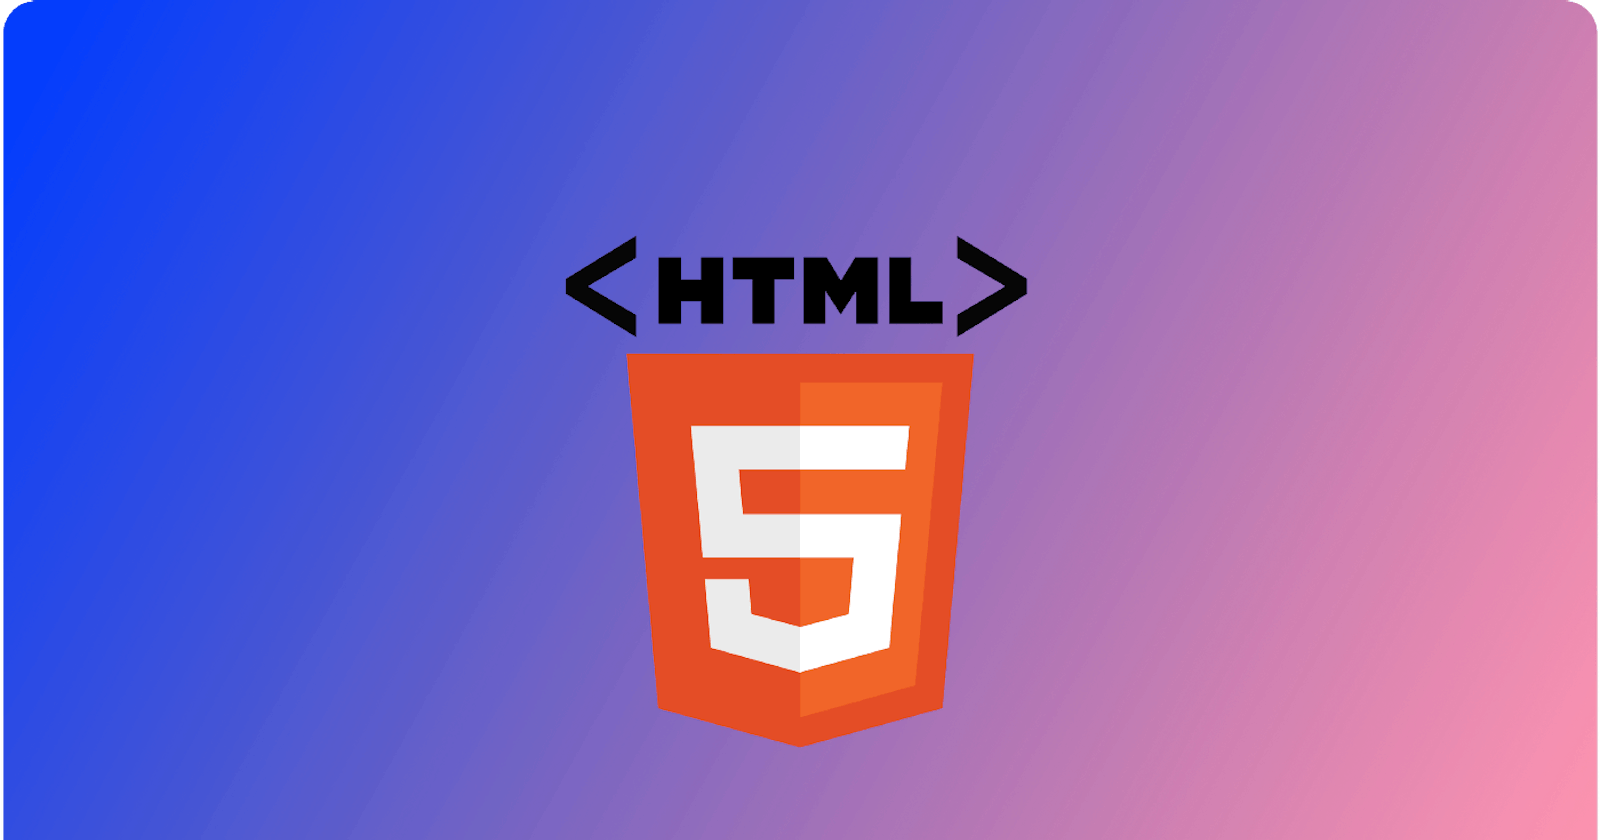 Why HTML is important for Web Development?